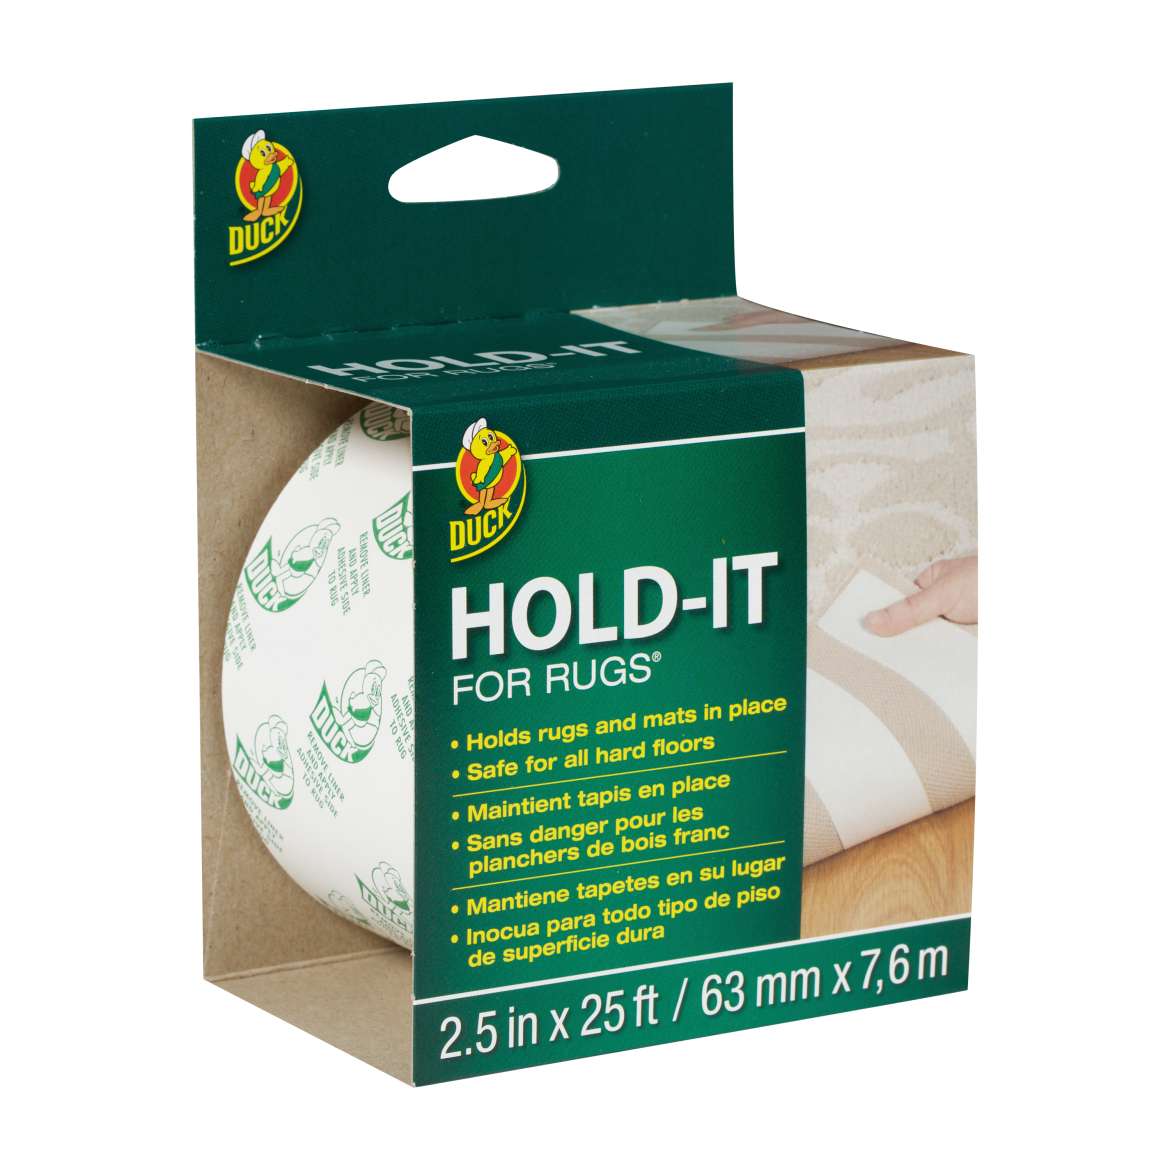 Duck Brand Hold-It For Rugs Adhesive Latex Foam